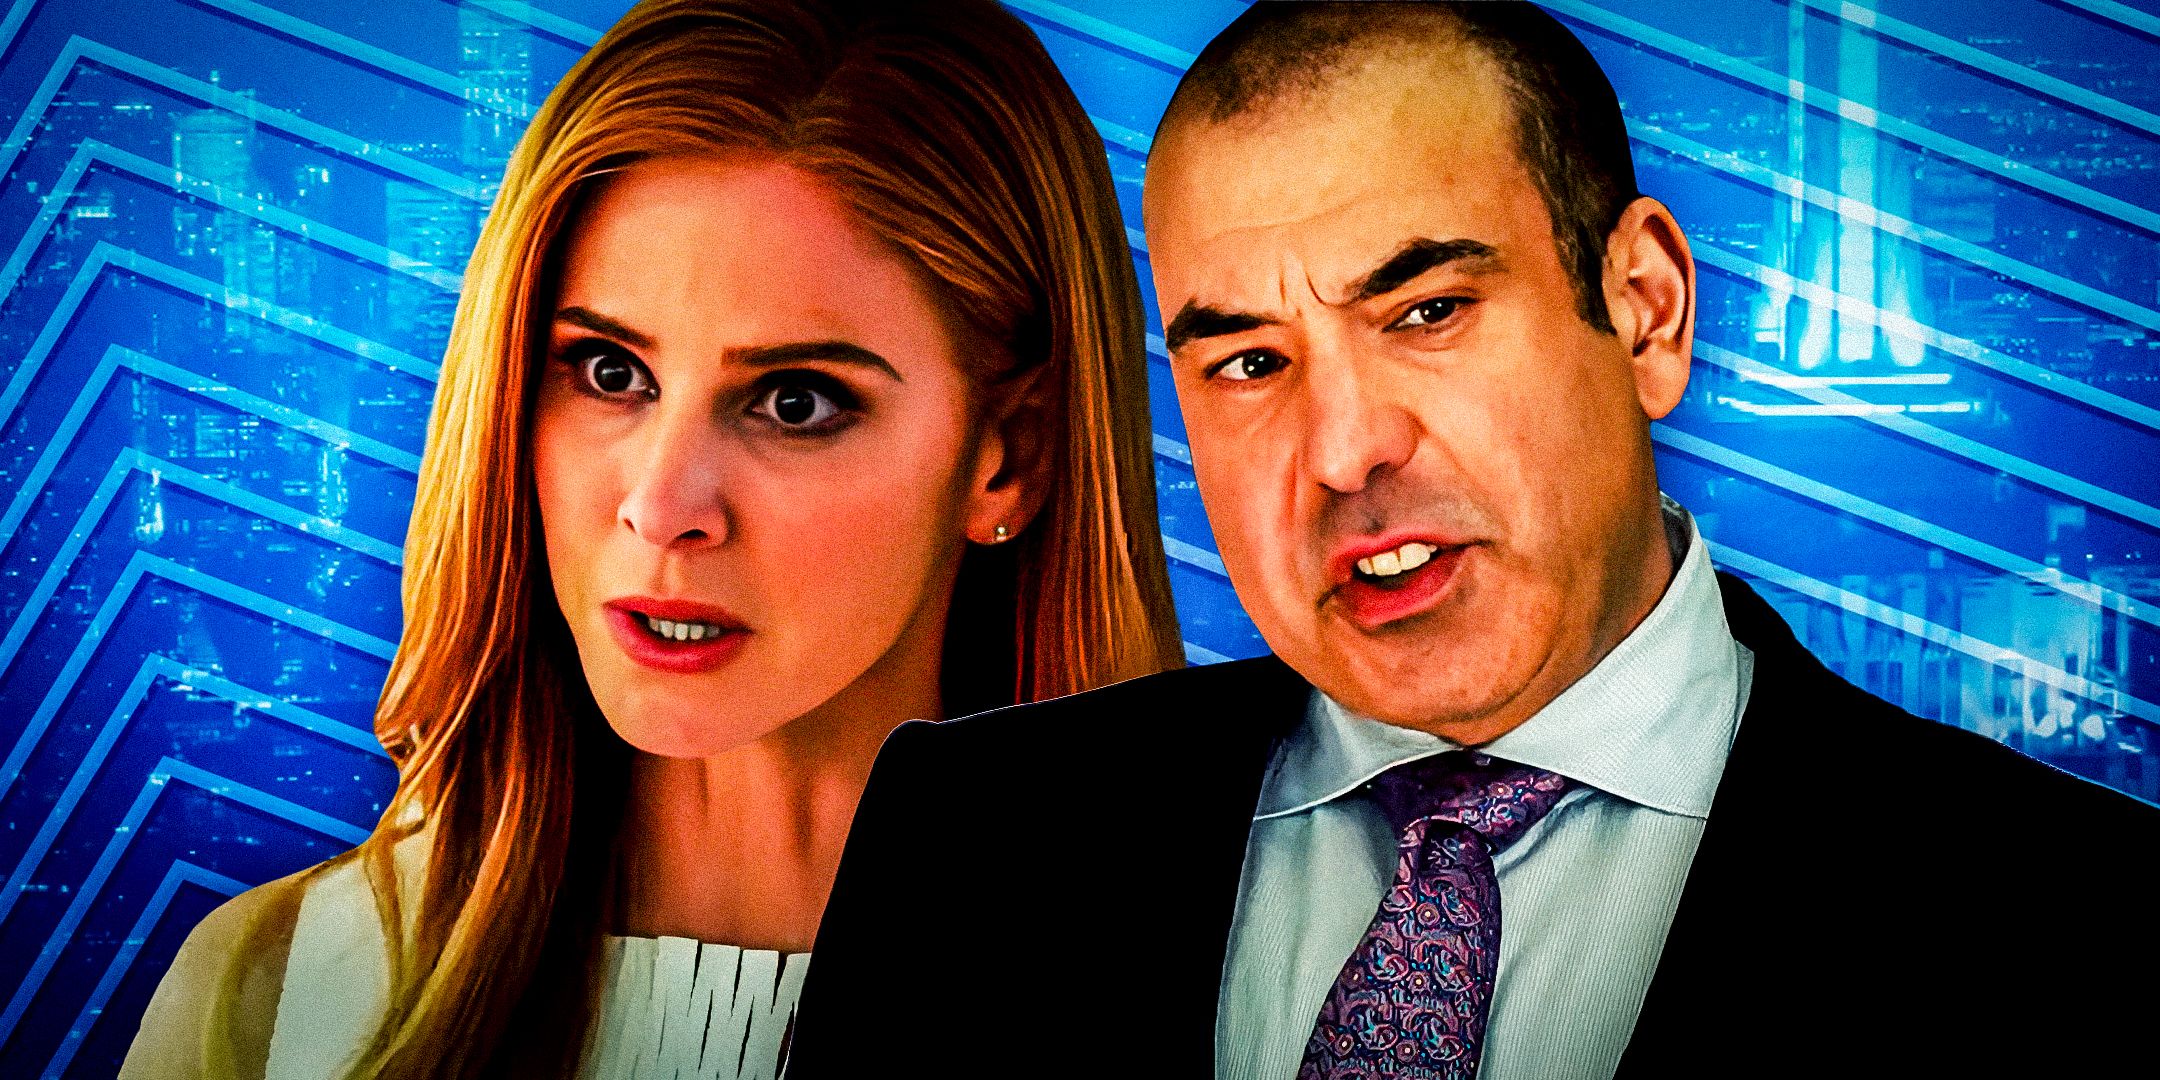 Custom photo of Custom image of Donna (Sarah Rafferty) and Louis (Rick Hoffman) from Suits